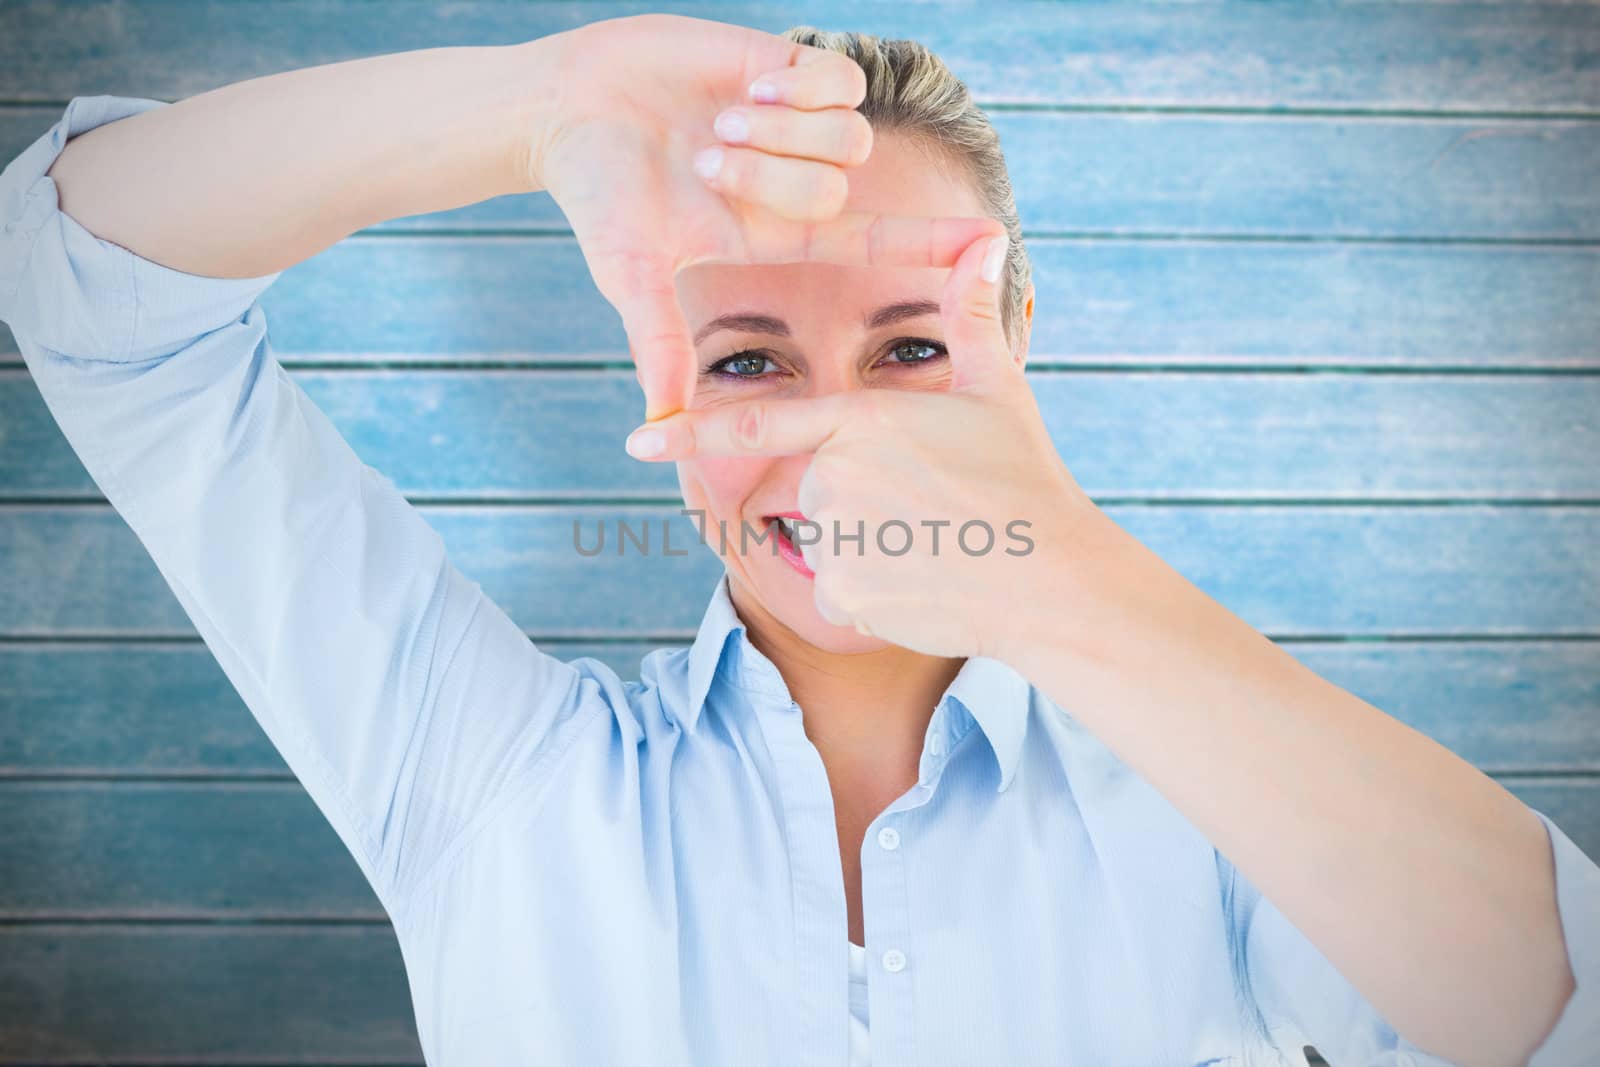 Smiling blonde making a hand gesture against wooden planks